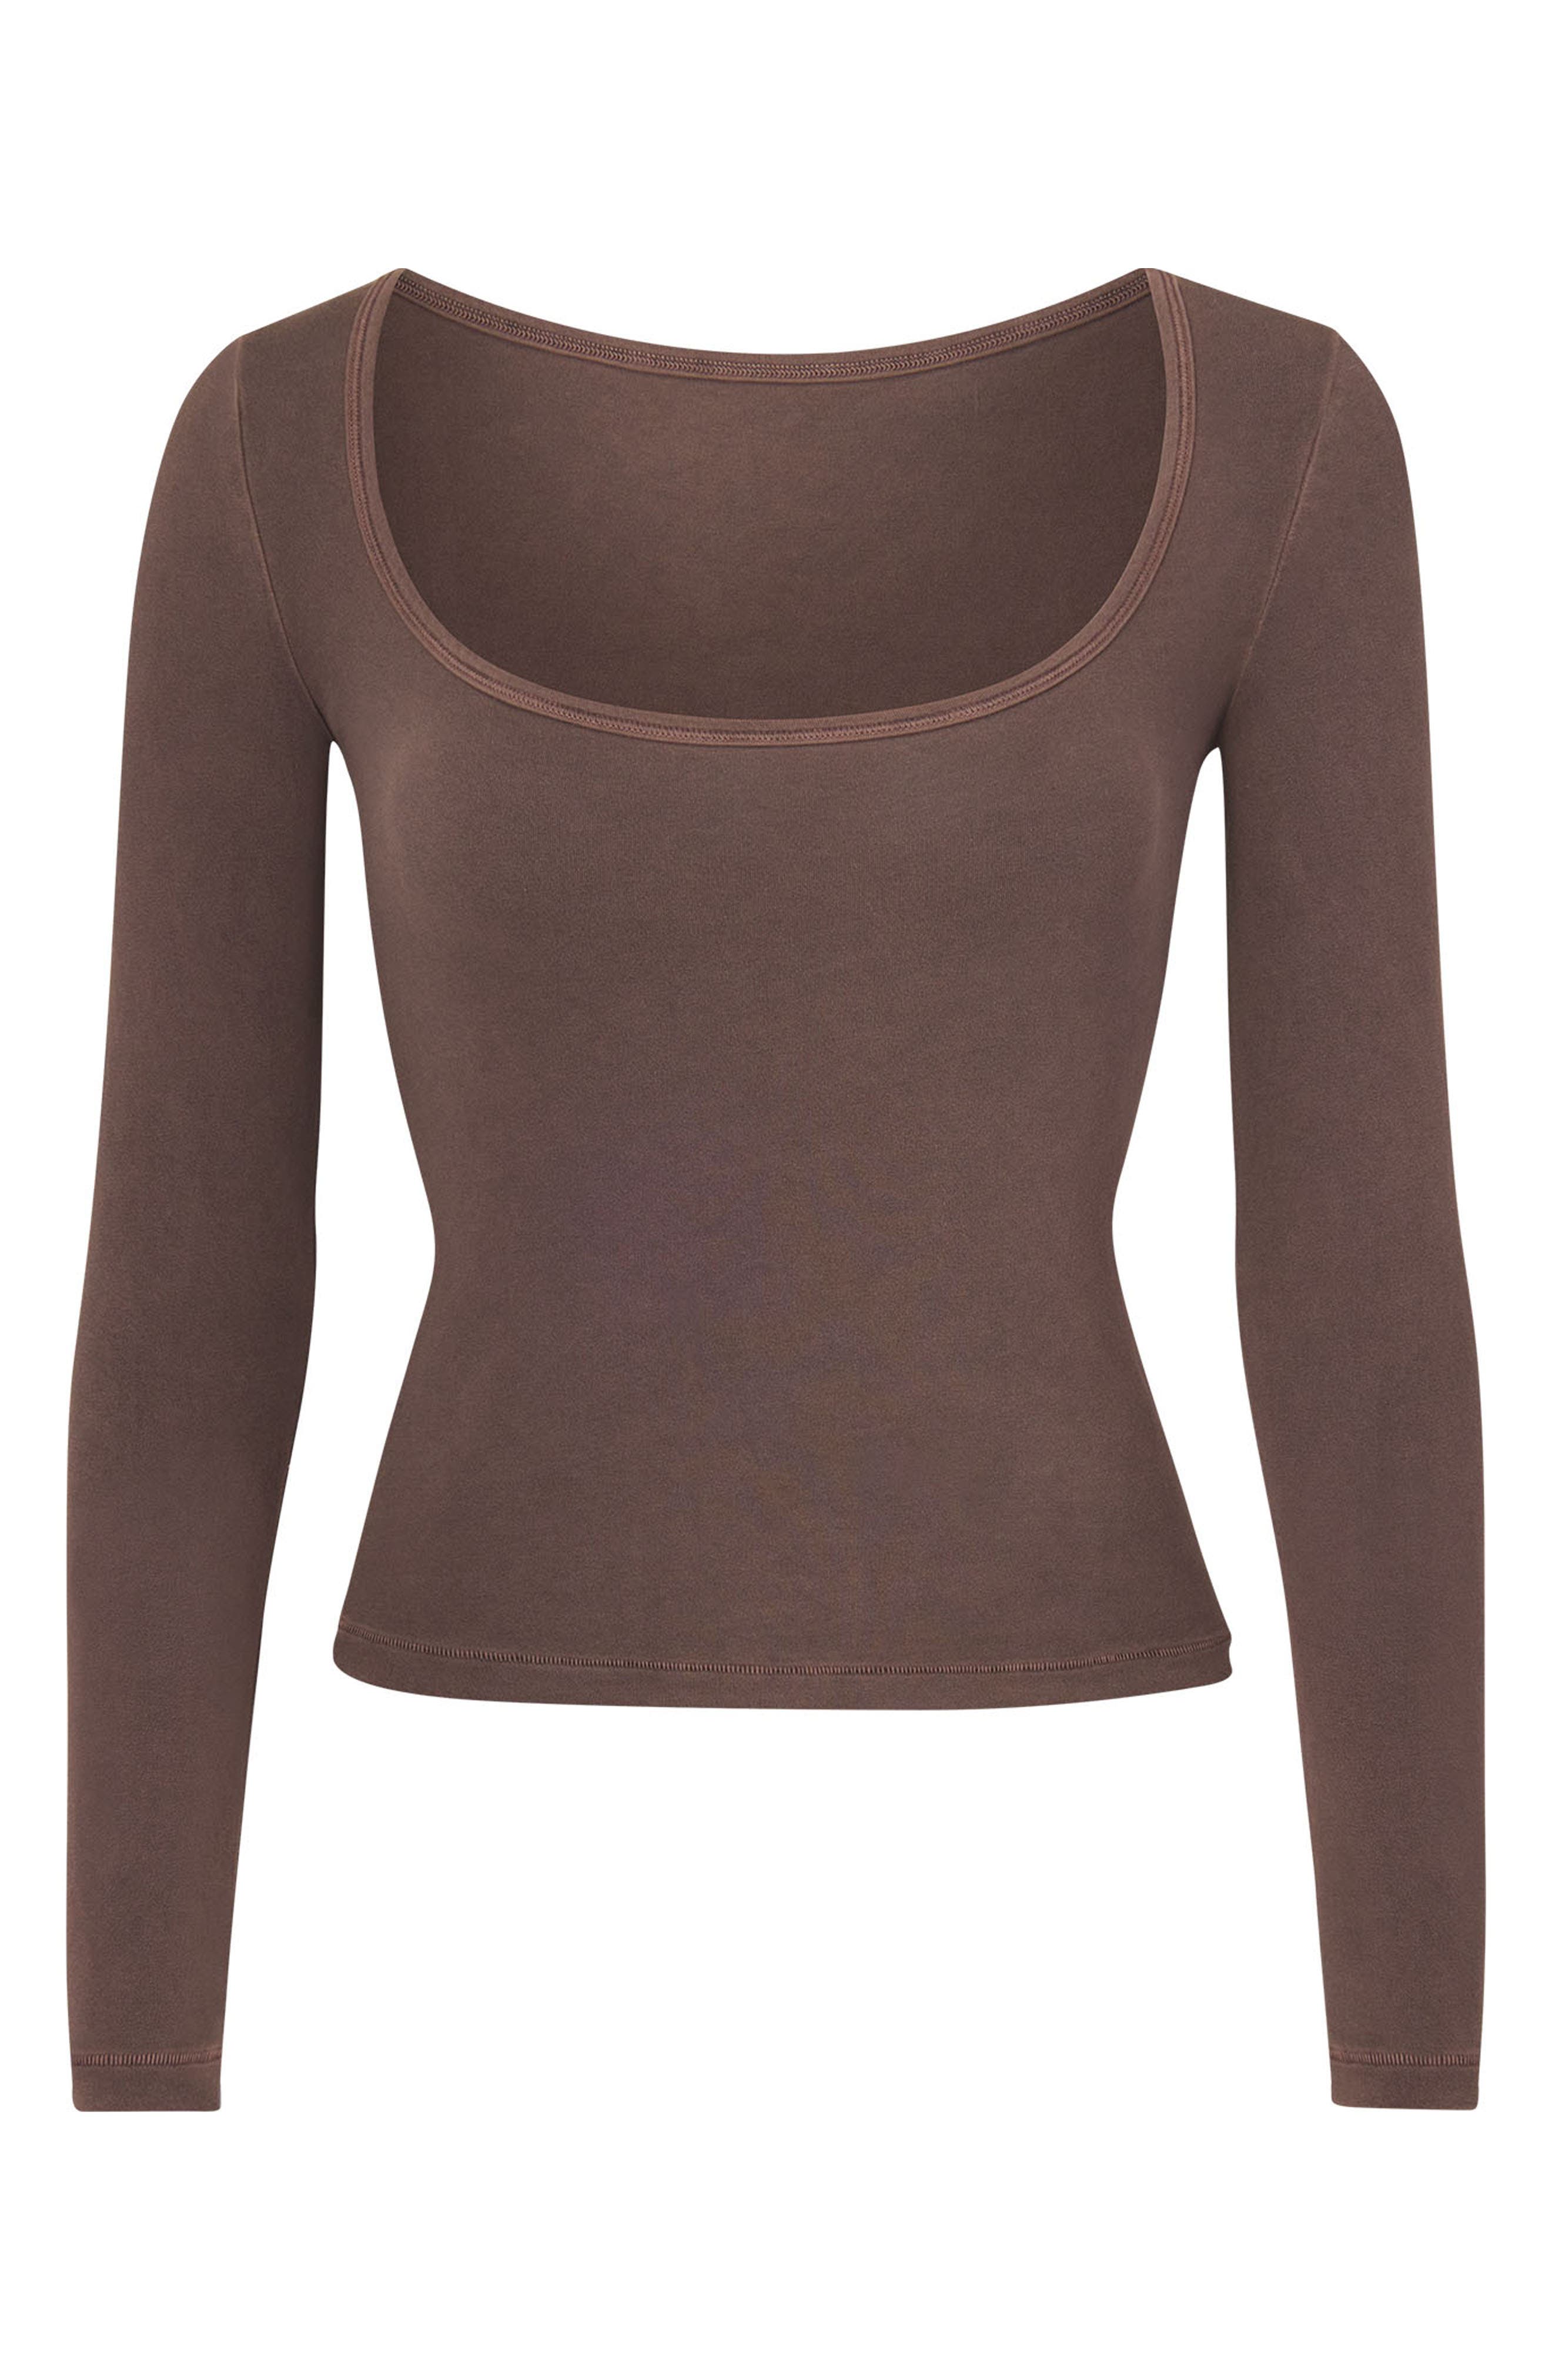 SKIMS Square Neck Long Sleeve T-Shirt in Washed Onyx